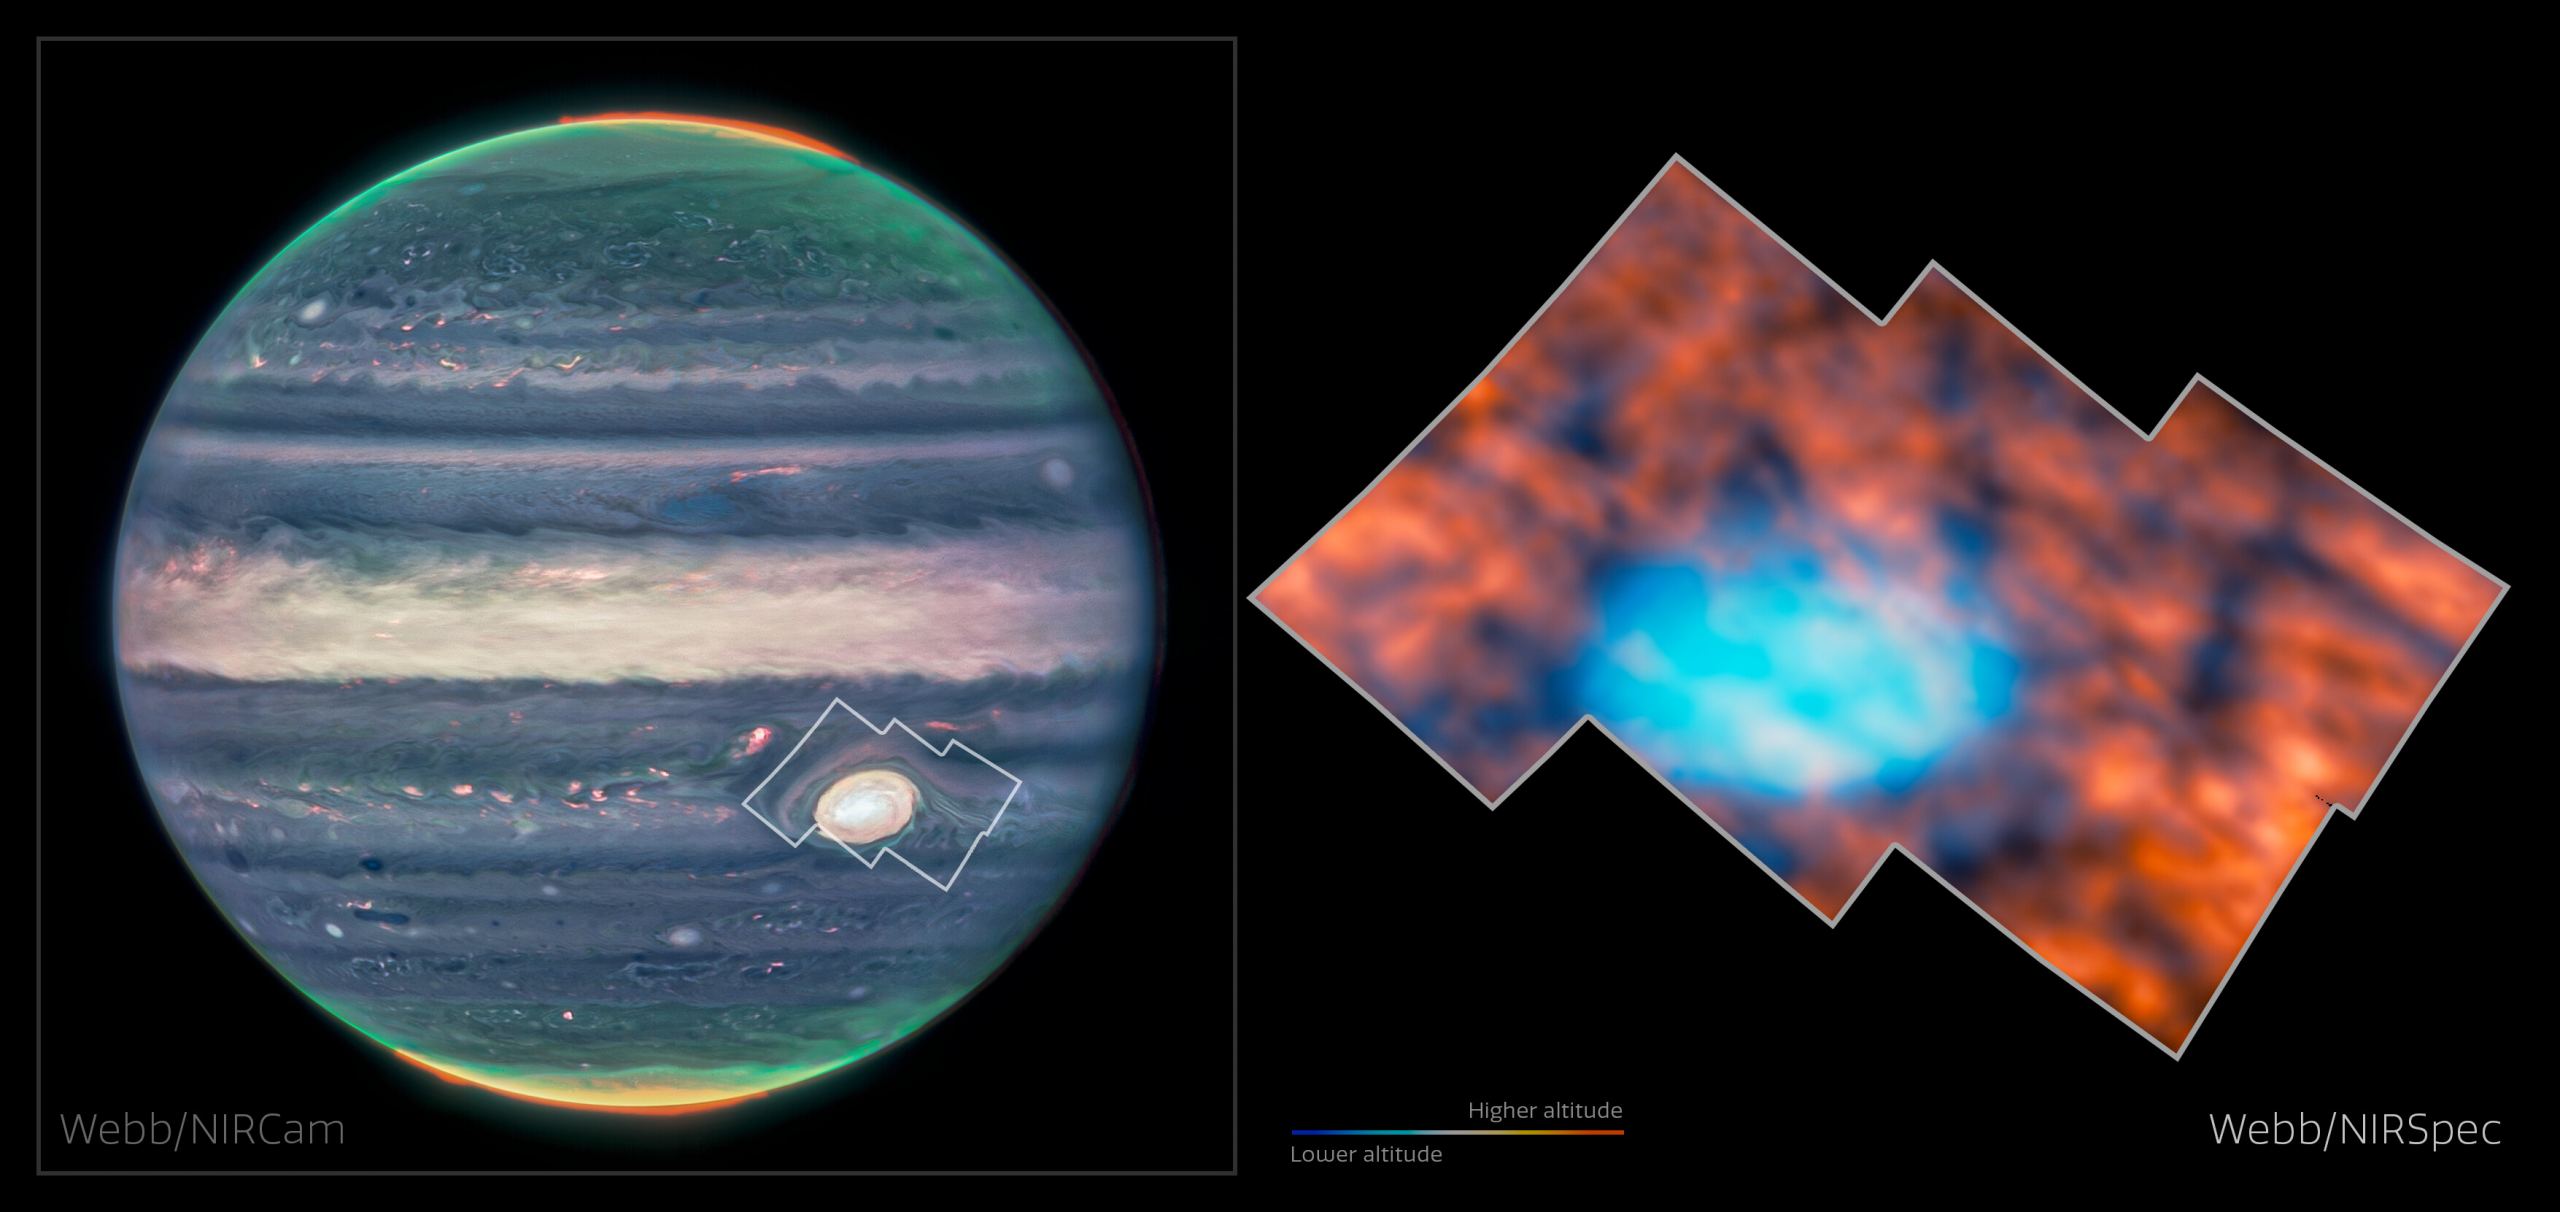 New Images From Webb Reveal Jupiter’s Complex Atmosphere [Video]